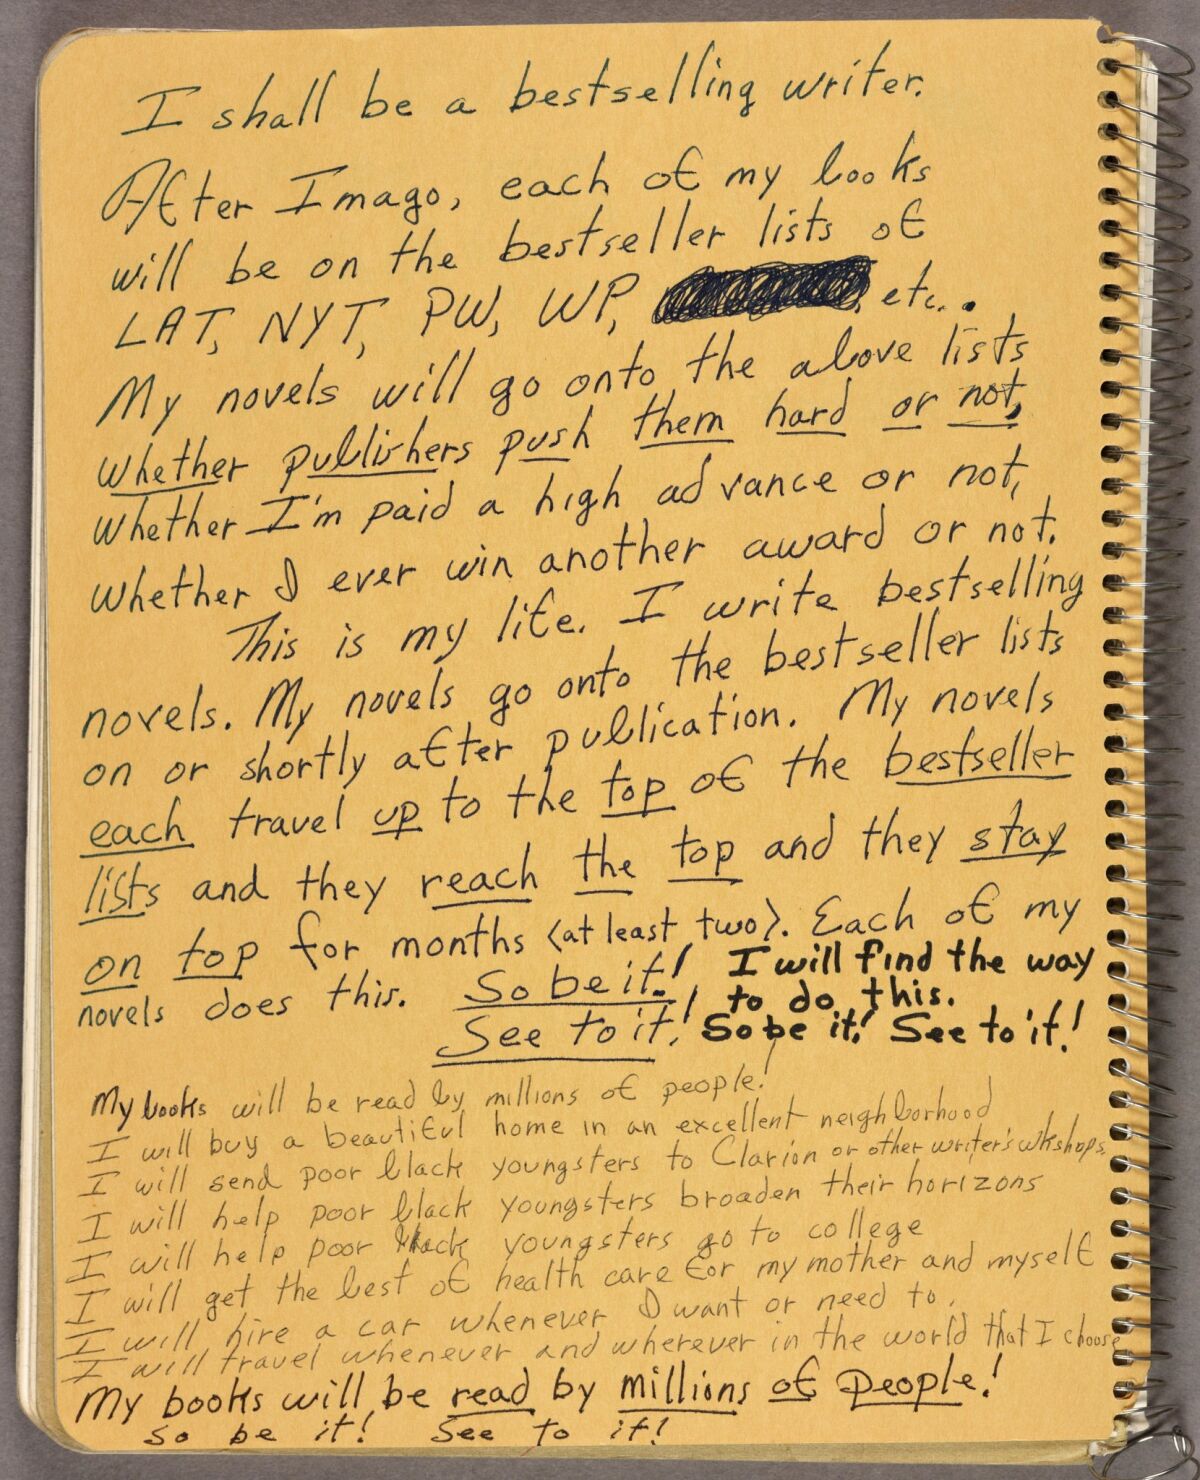 A full view of Butler's inspirational message to herself on the back of a notebook. (Estate of Octavia E. Butler)